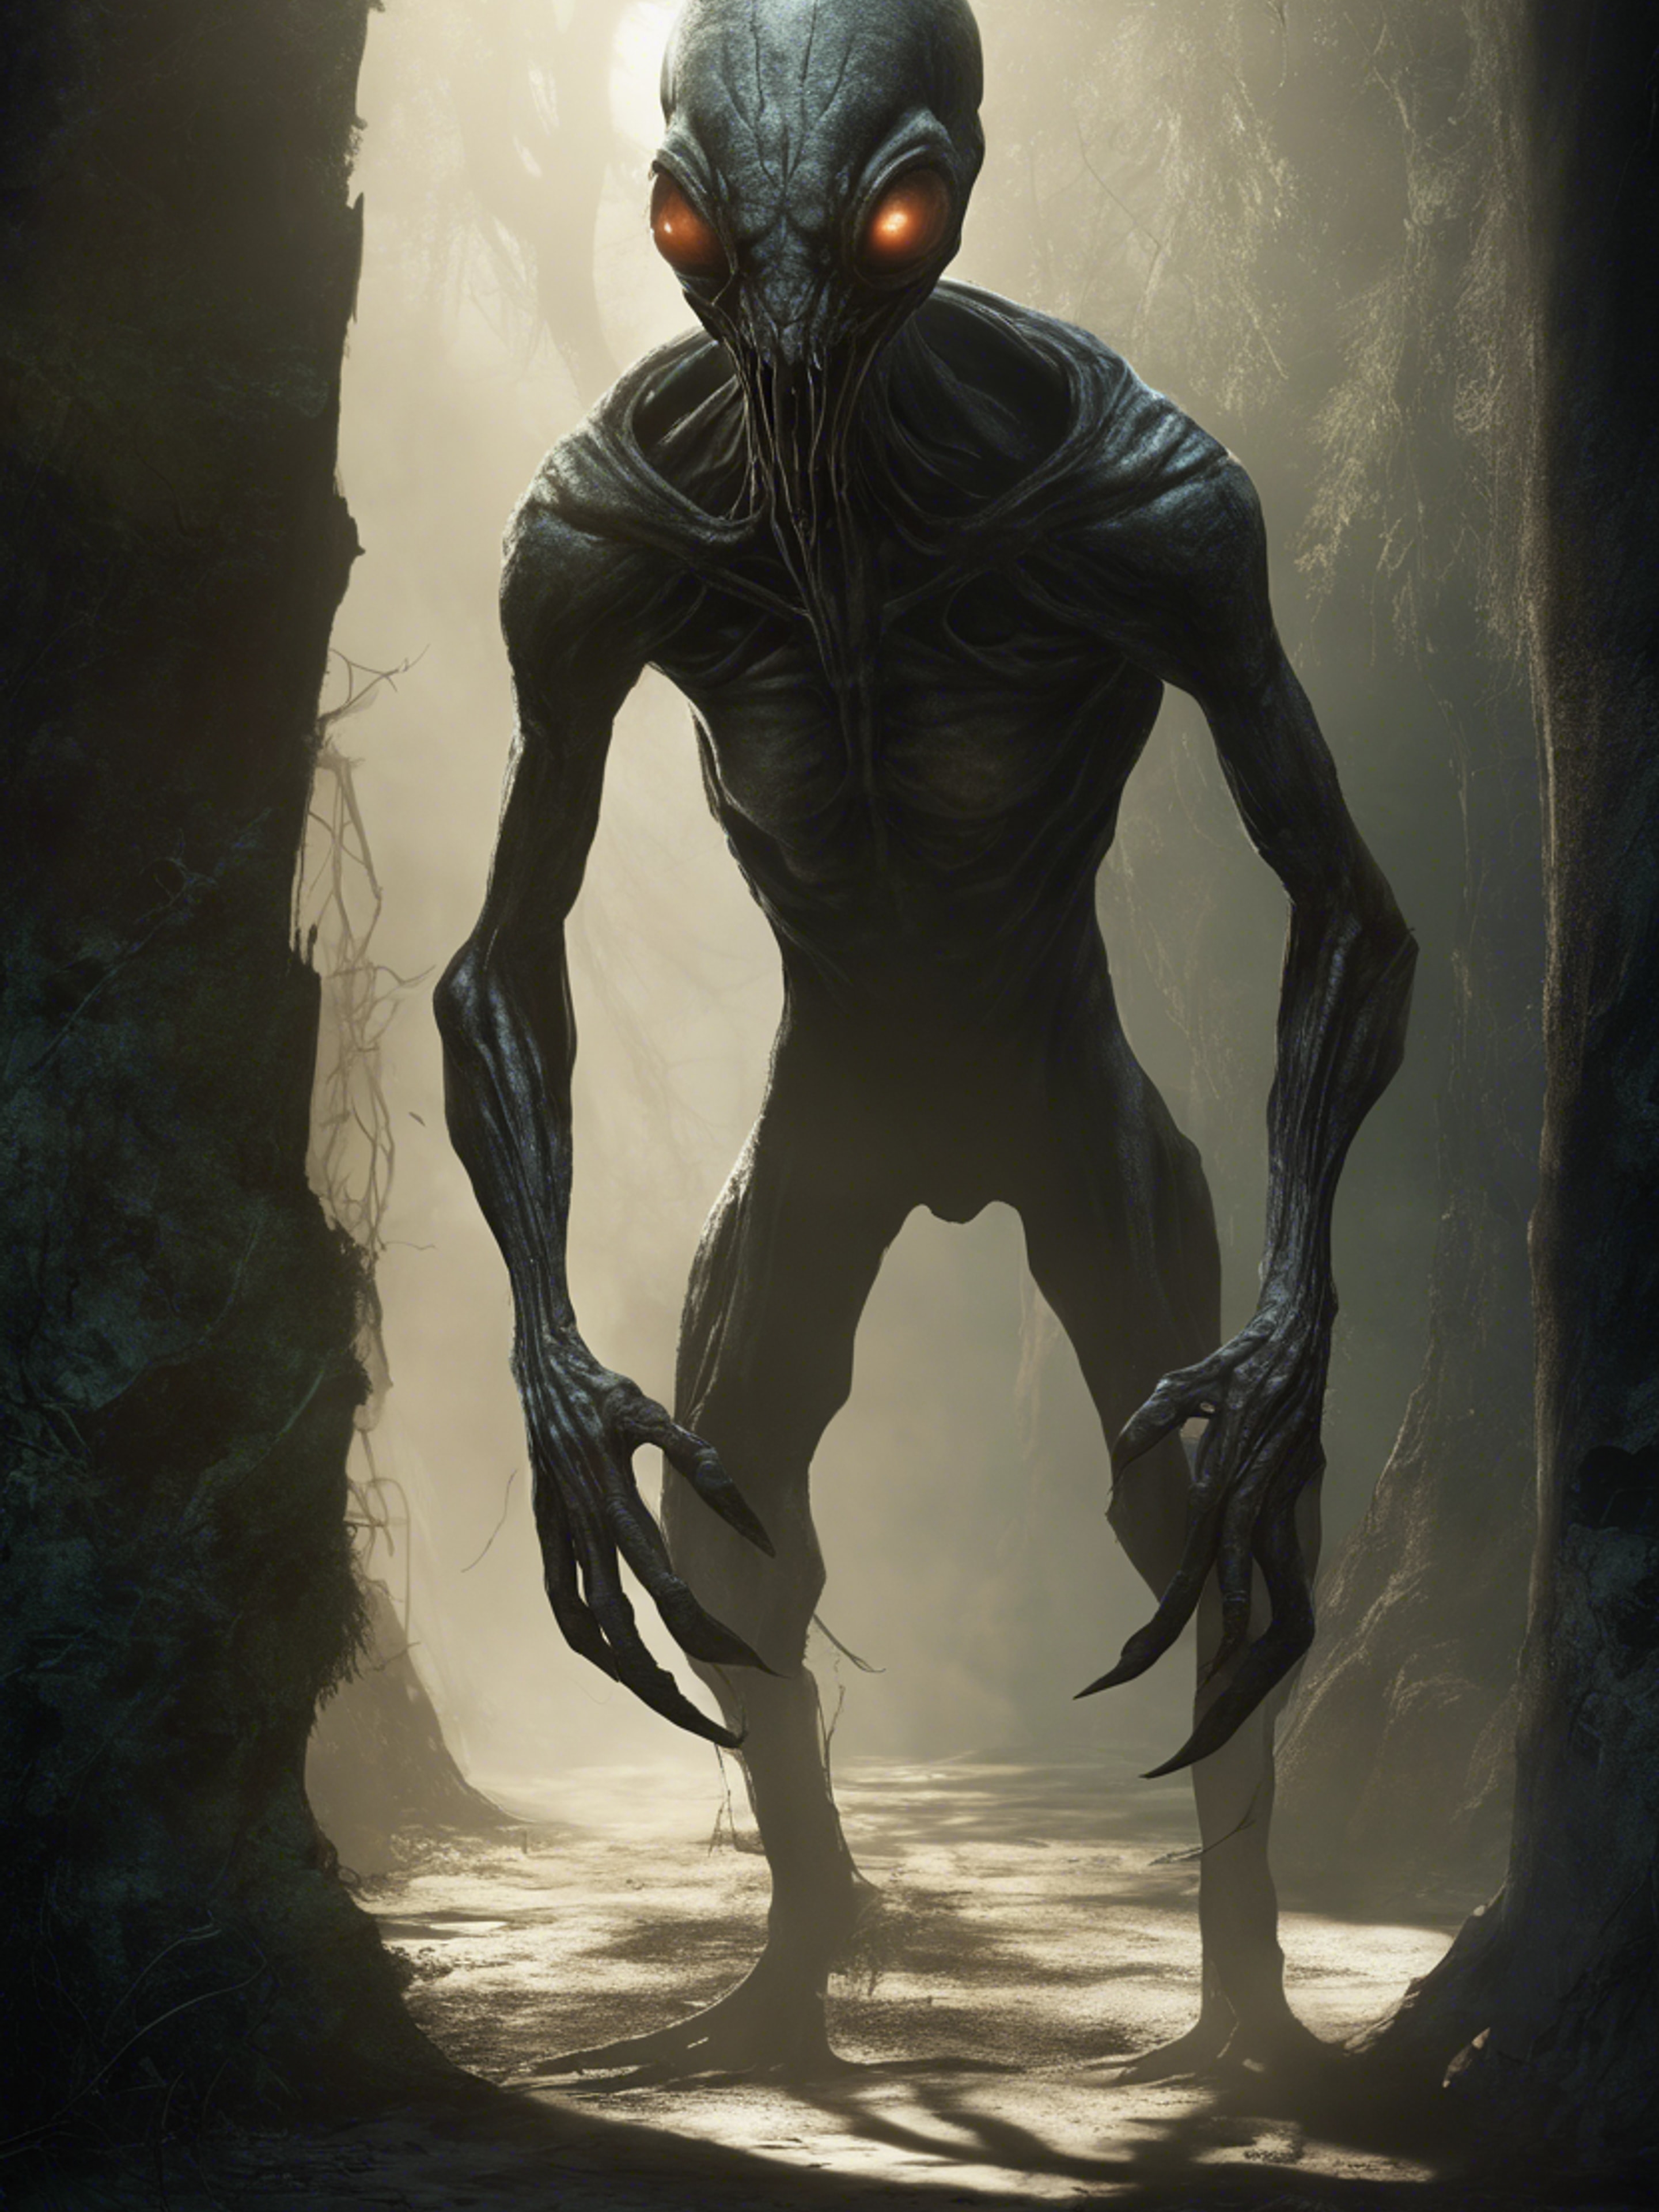 An eerie shot of an alien creature from a sci-fi horror game, emerging from the shadows. Ფონი[70e4d6a77d4241508cba]